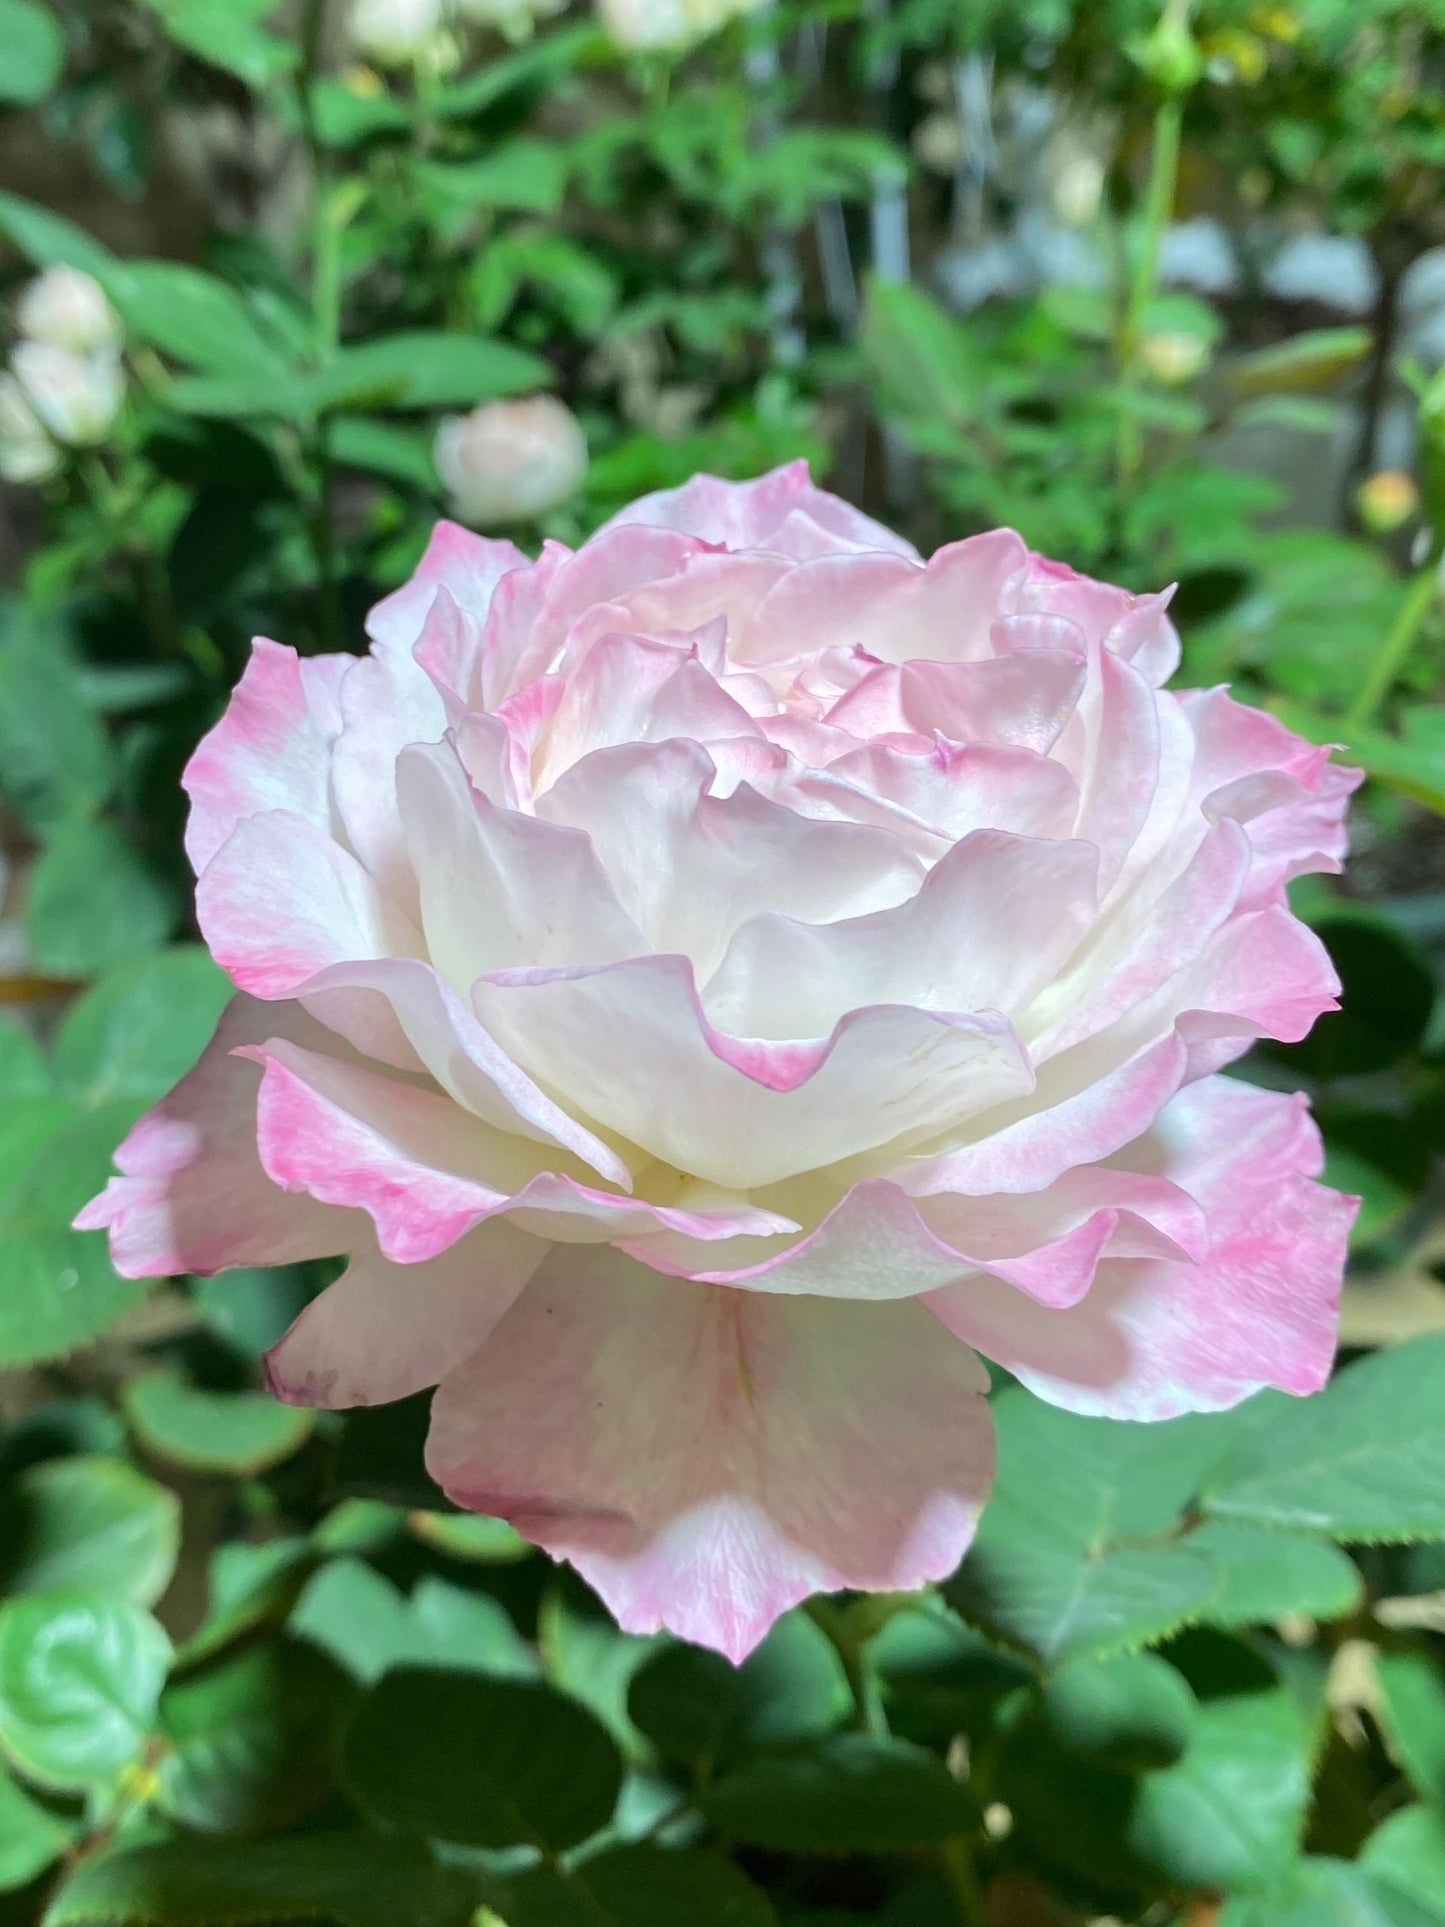 Rosa [ Seraphim  セラフィム-] 2 Gal OwnRoot |六翼天使 |Award-winning | Strong Fragrance|  Strong Disease Resistance| Wavy Bloom |Ruffle Lace